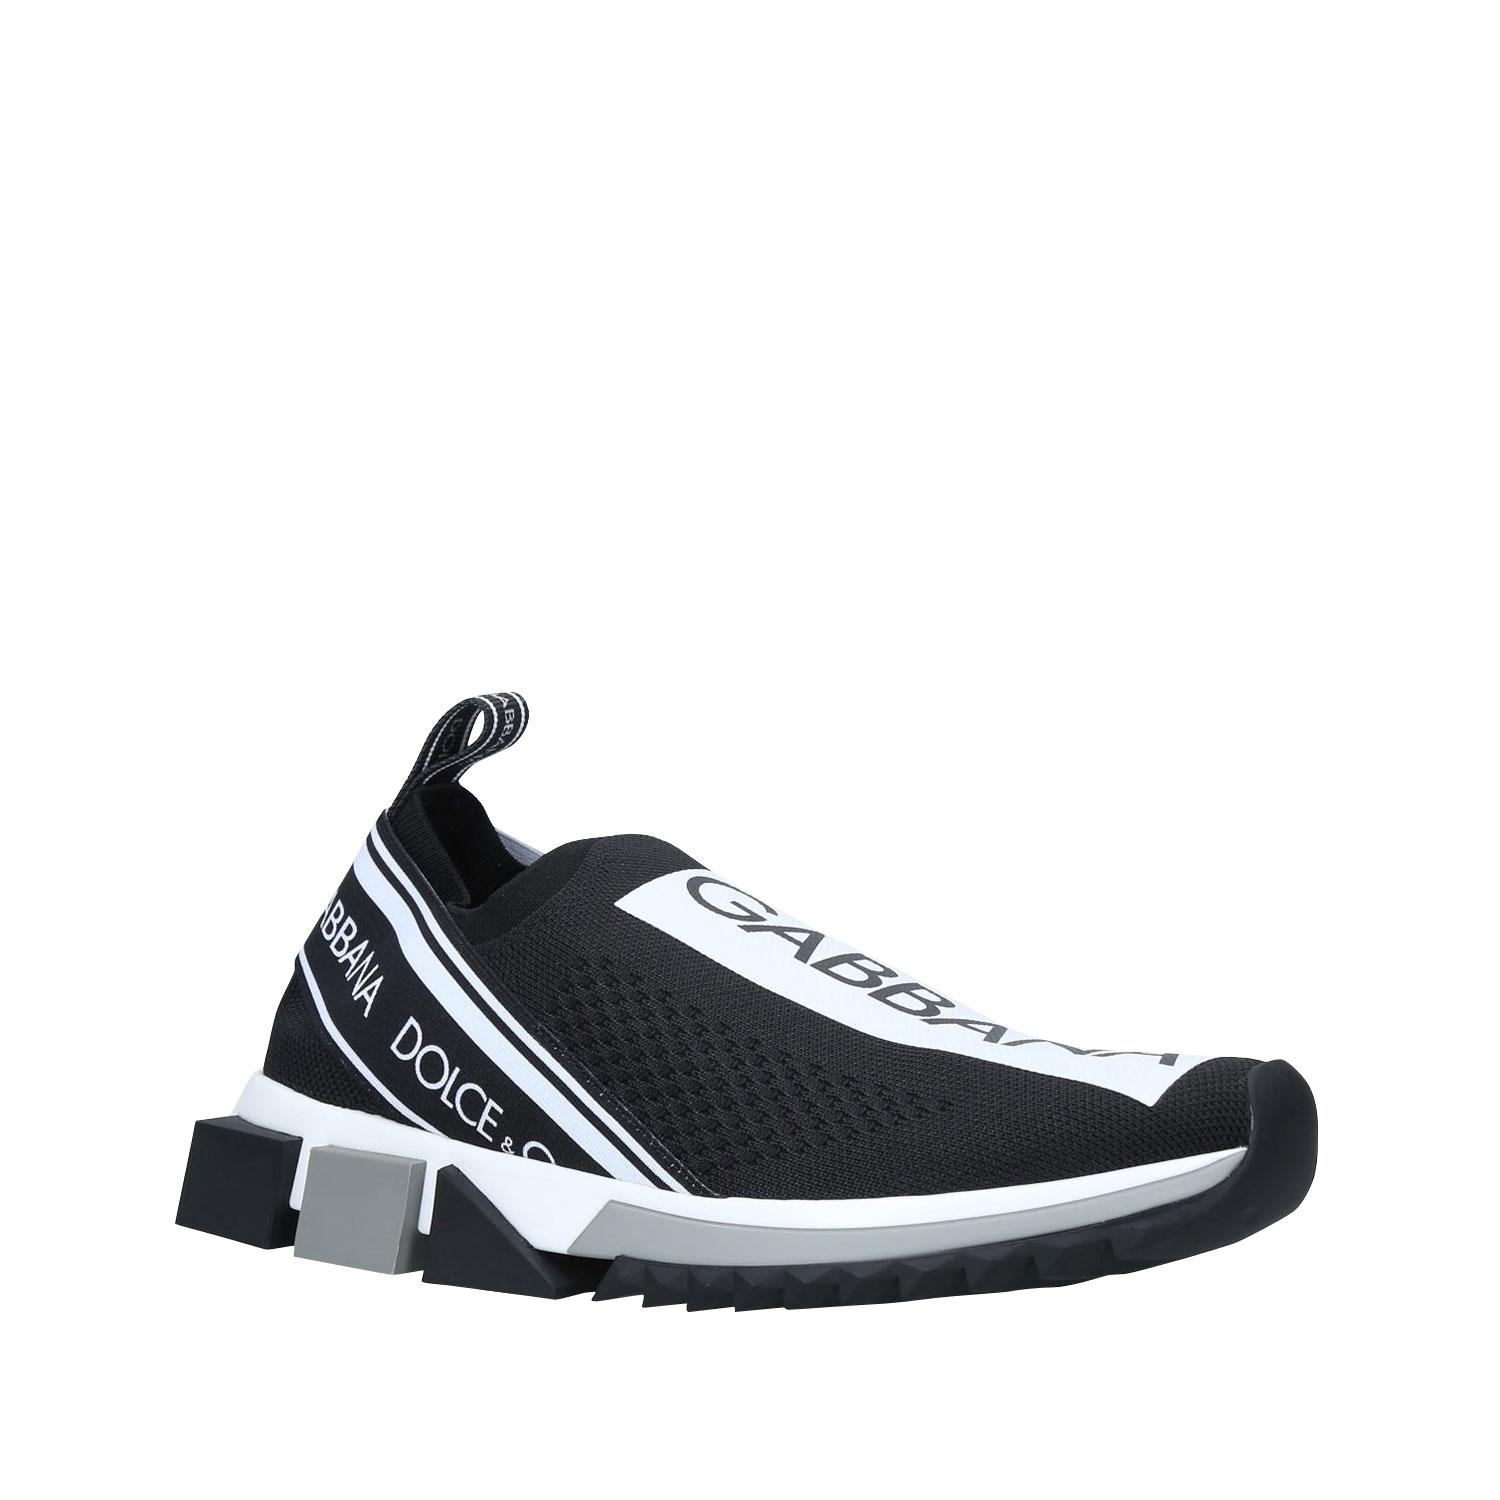 Atletica Running Shoes